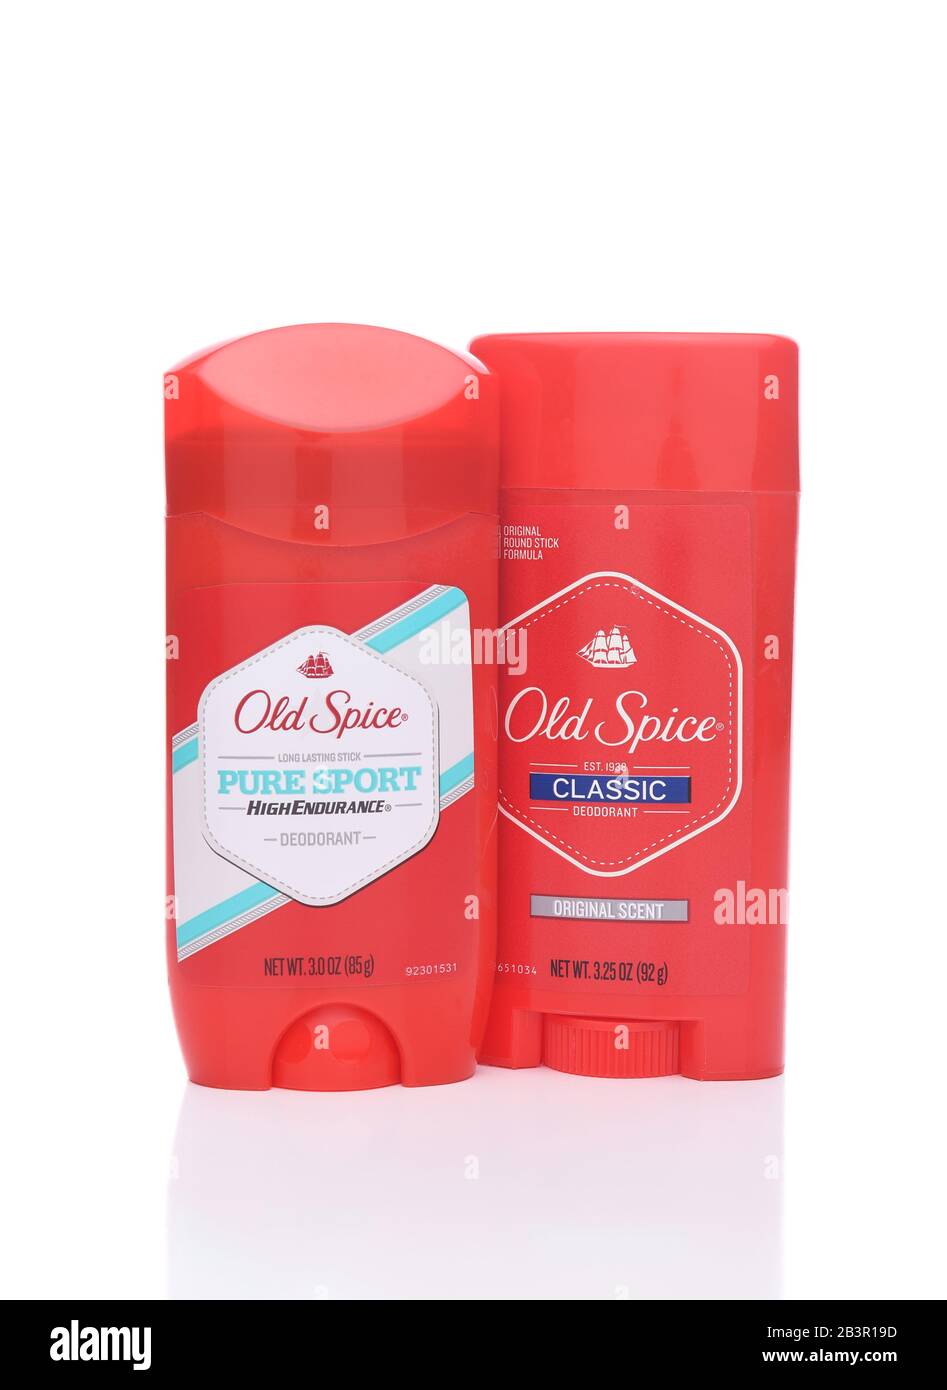 IRVINE, CALIFORNIA - JANUARY 22, 2017: Old Spice Deodorants. From Proctor and Gamble a line of male grooming products, deodorants, shampoos, body wash Stock Photo